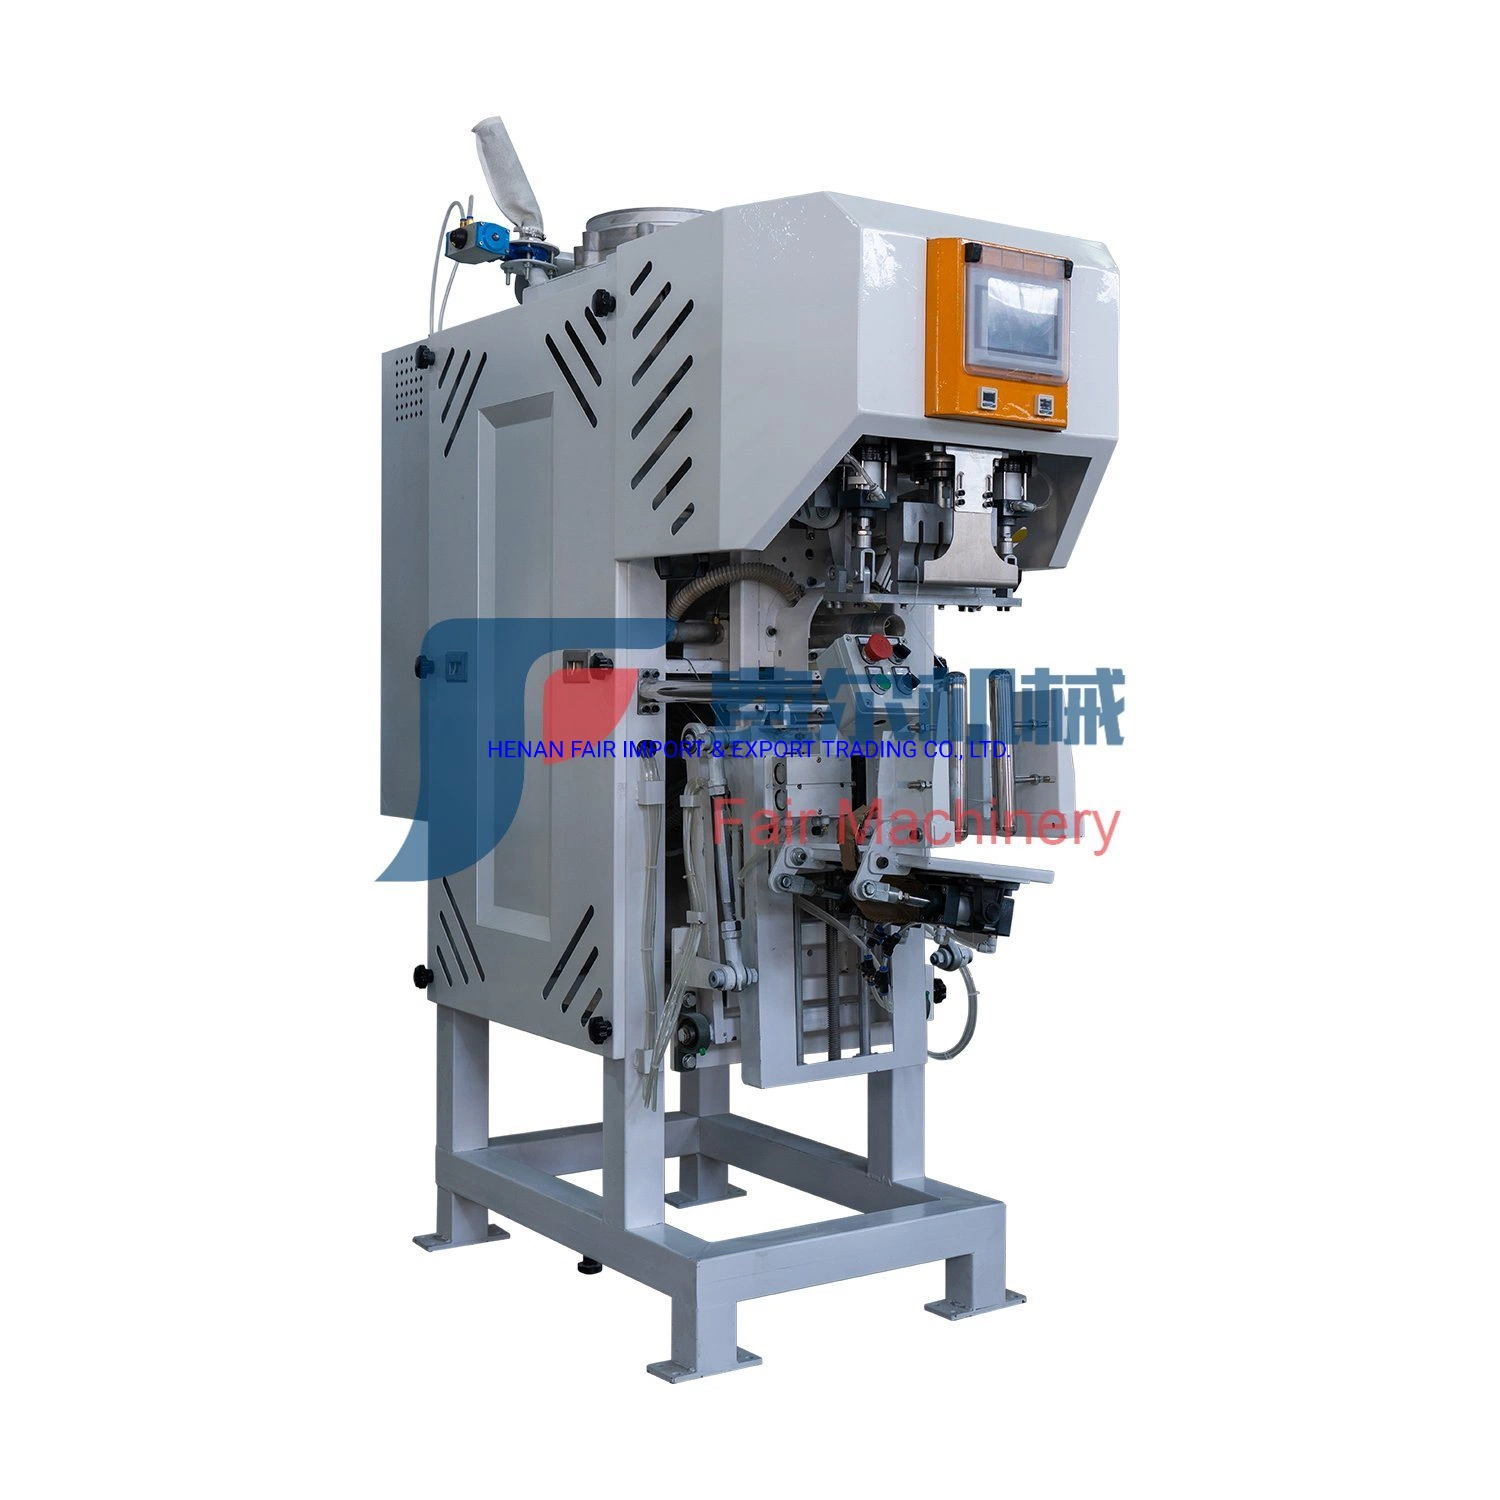 Automatic Valve Bag Air-Blowing Cement Sugar Powder Packing Machine for Vertica Weighting Packaging 5-50kg